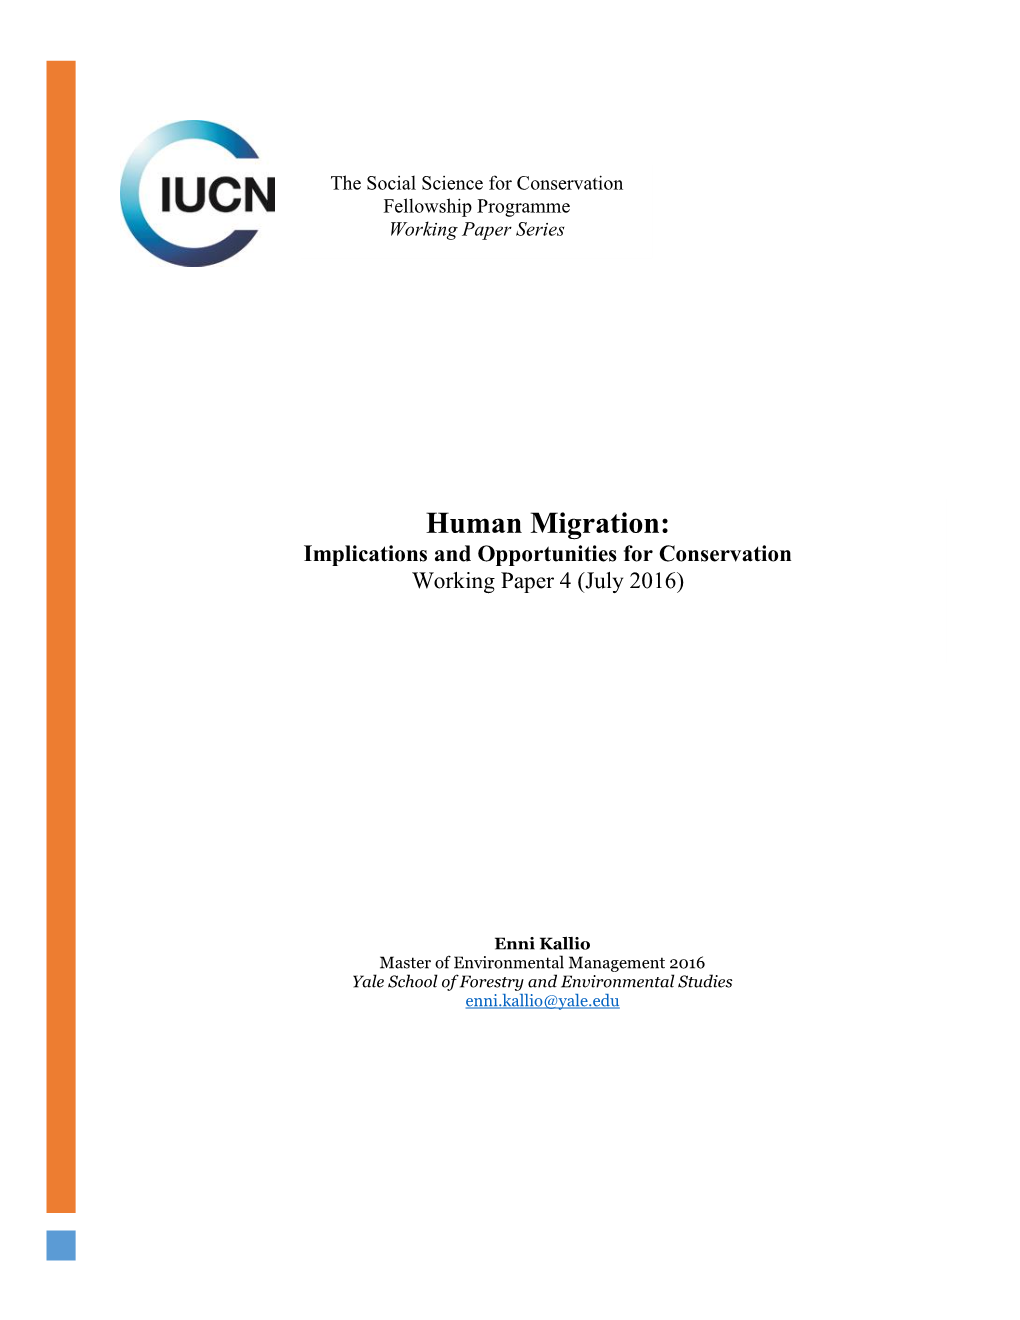 Human Migration: Implications and Opportunities for Conservation Working Paper 4 (July 2016)